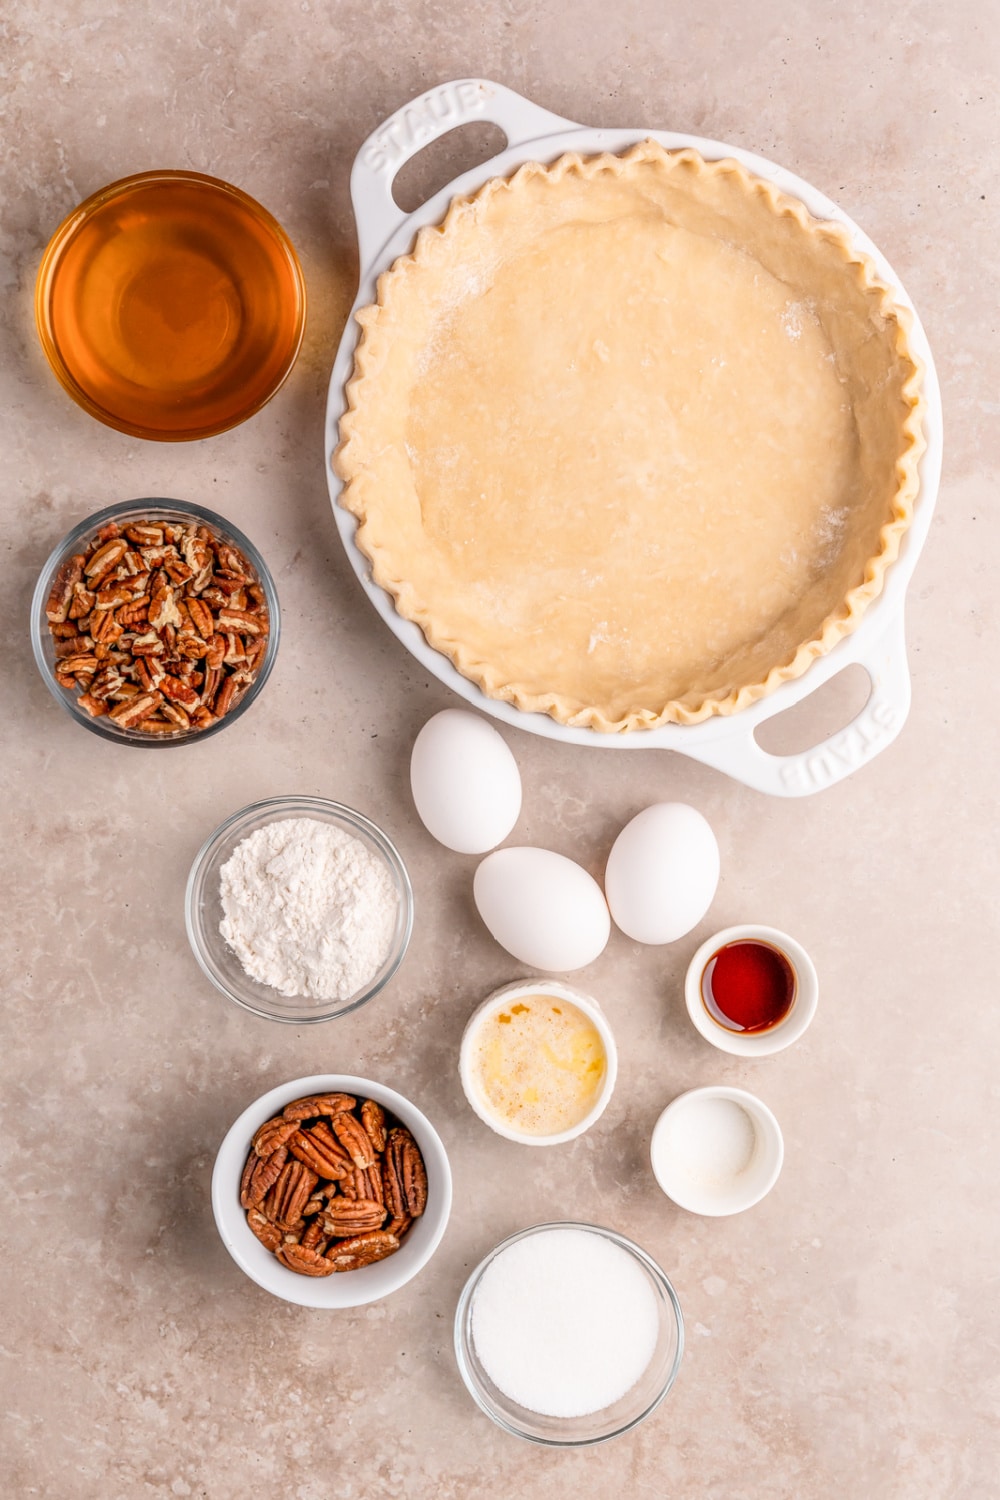 Measured ingredients needed to make this Honey Pecan Pie presented in glass bowls on a grey background.